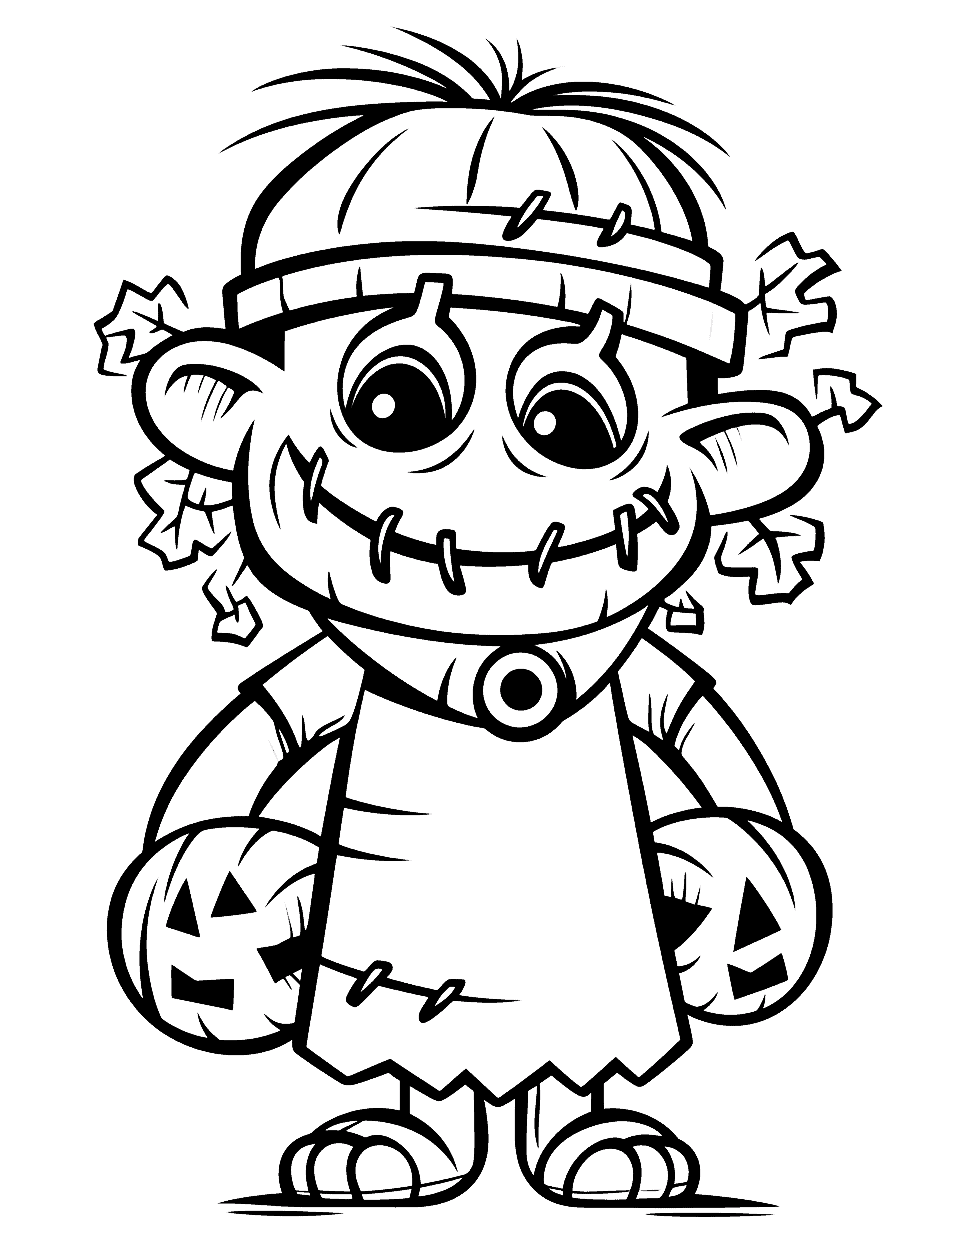 Frankenstein's Monster Portrait Halloween Coloring Page - A friendly interpretation of Frankenstein’s monster, with big stitches and a kind smile.